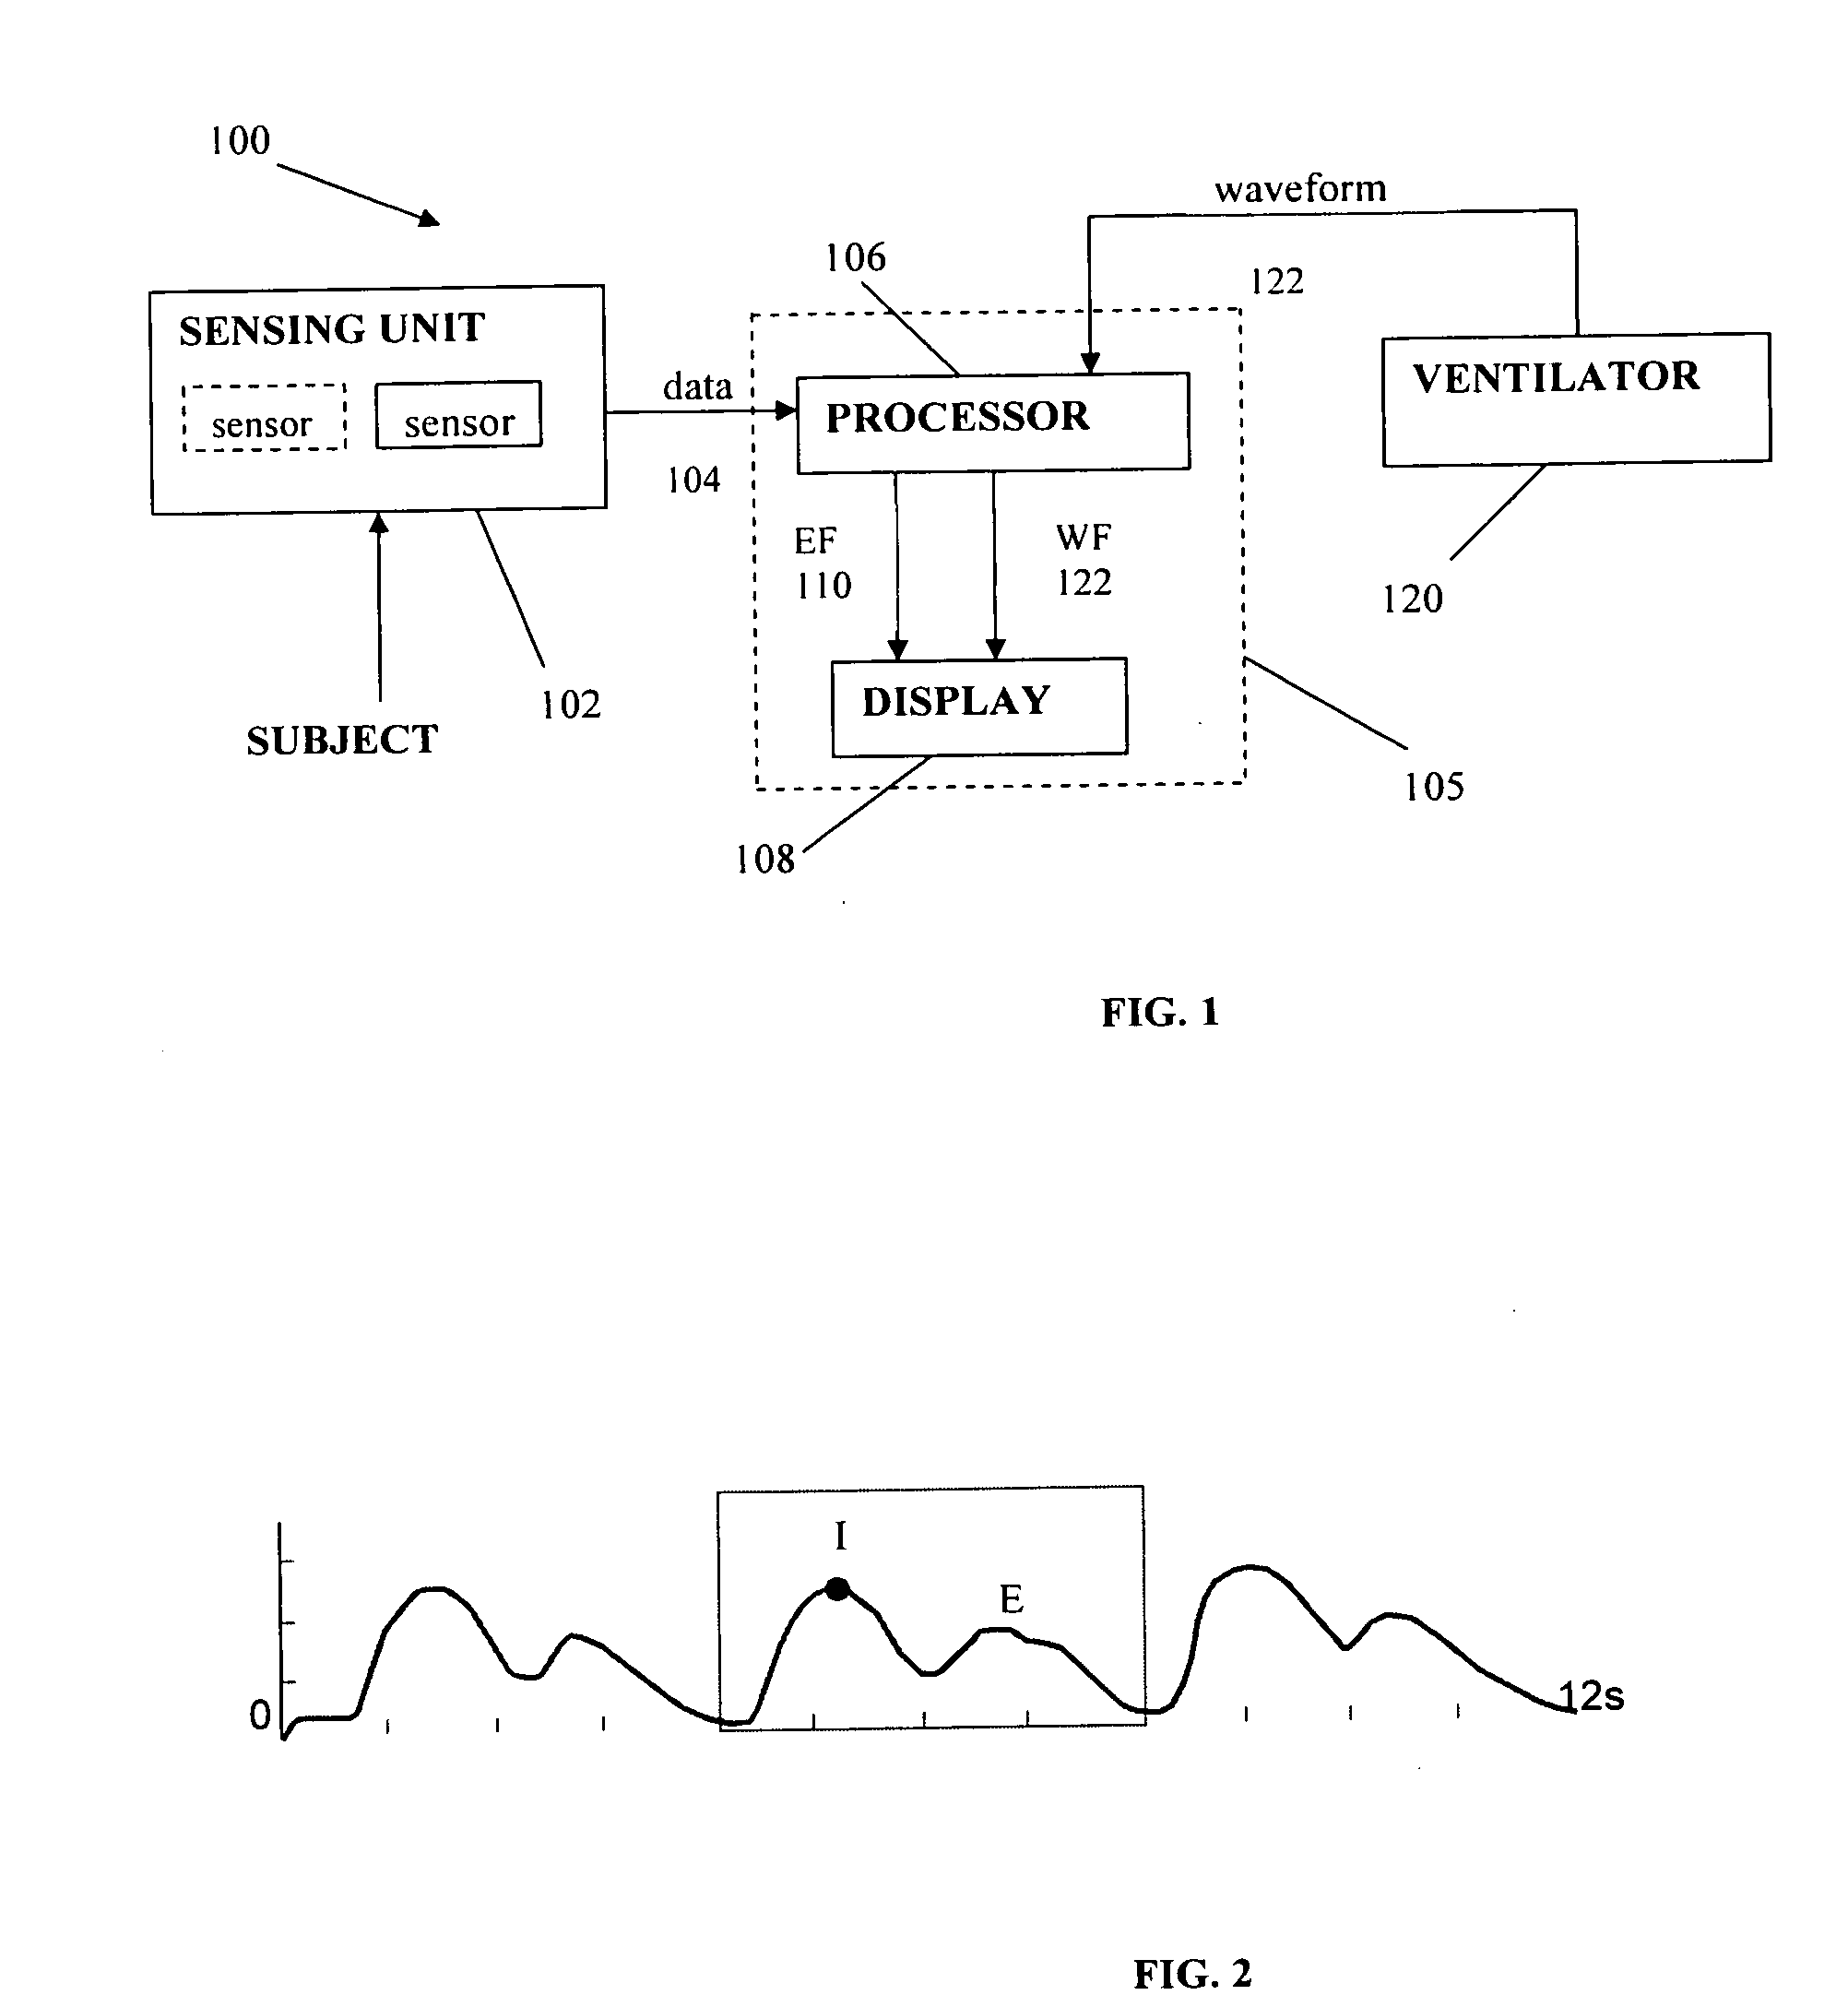 Method and System for Assessing Lung Condition and Managing Mechanical Respiratory Ventilation